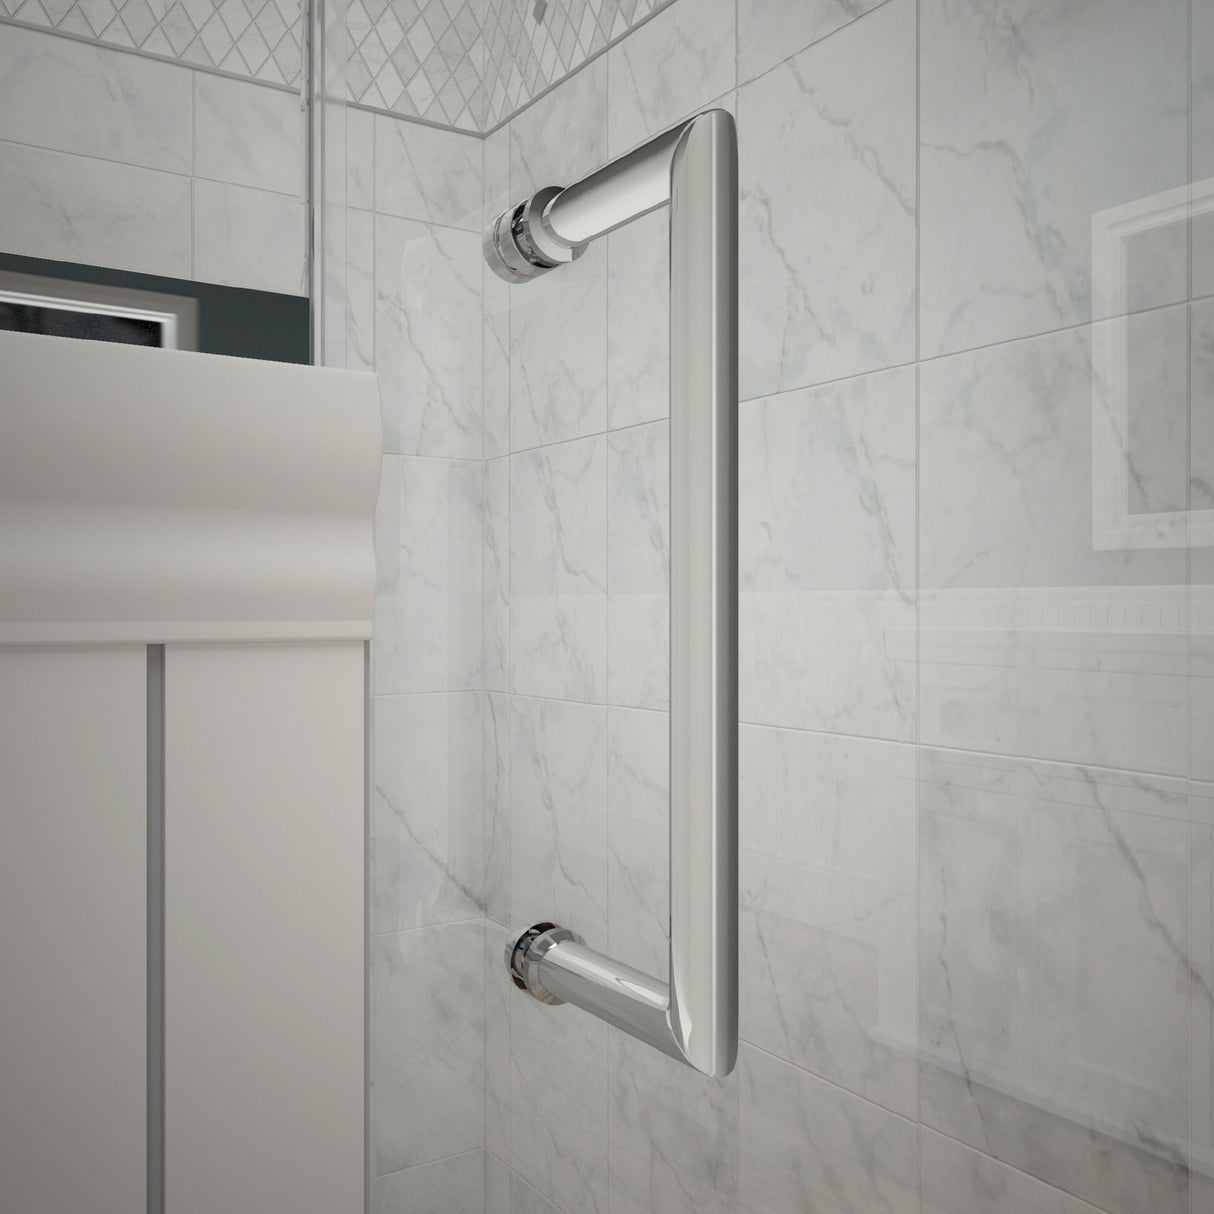 DreamLine Unidoor 42-43 in. W x 72 in. H Frameless Hinged Shower Door with Support Arm in Chrome